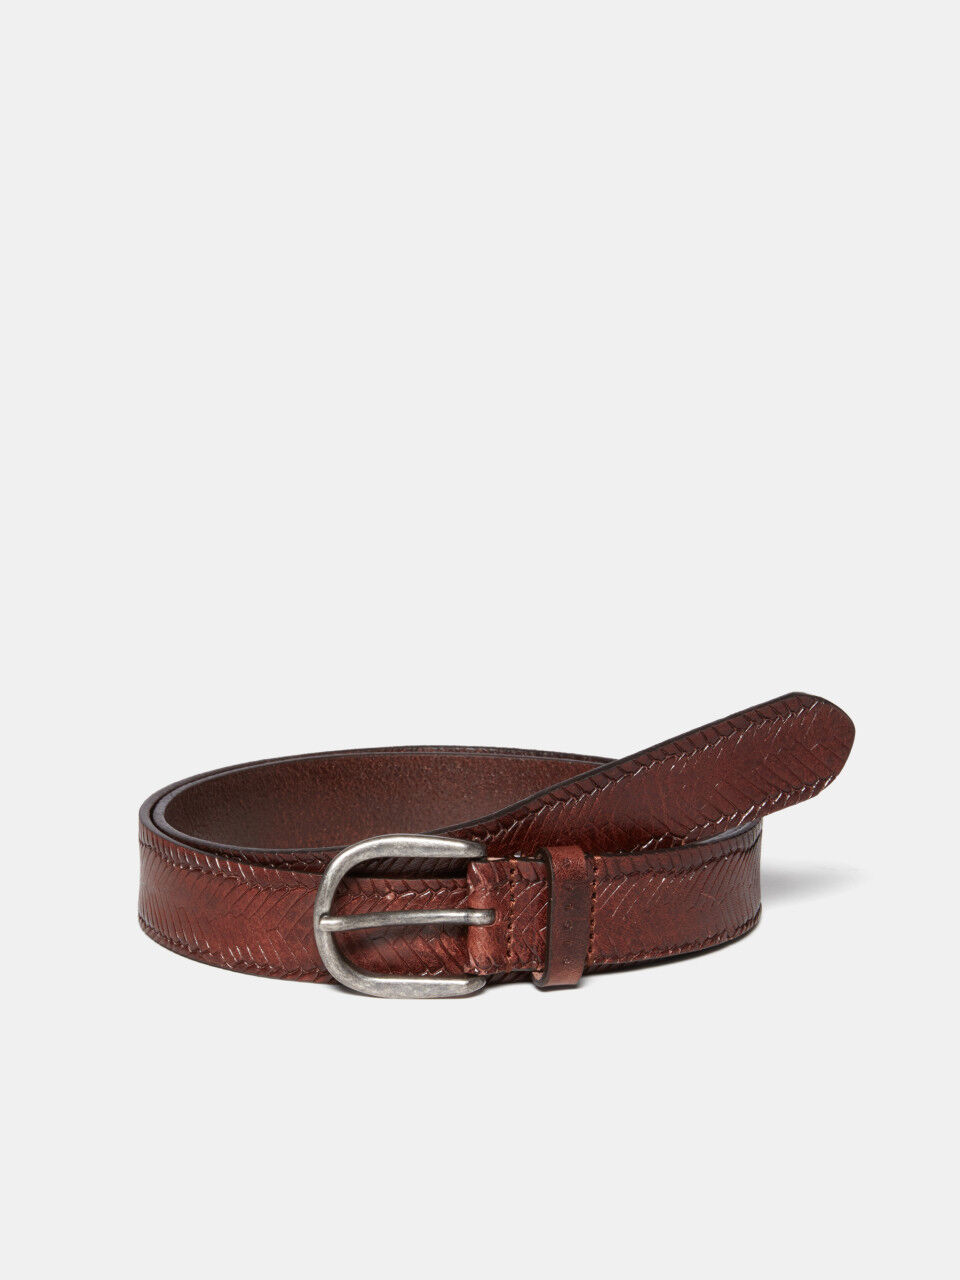 Braided belt in leather